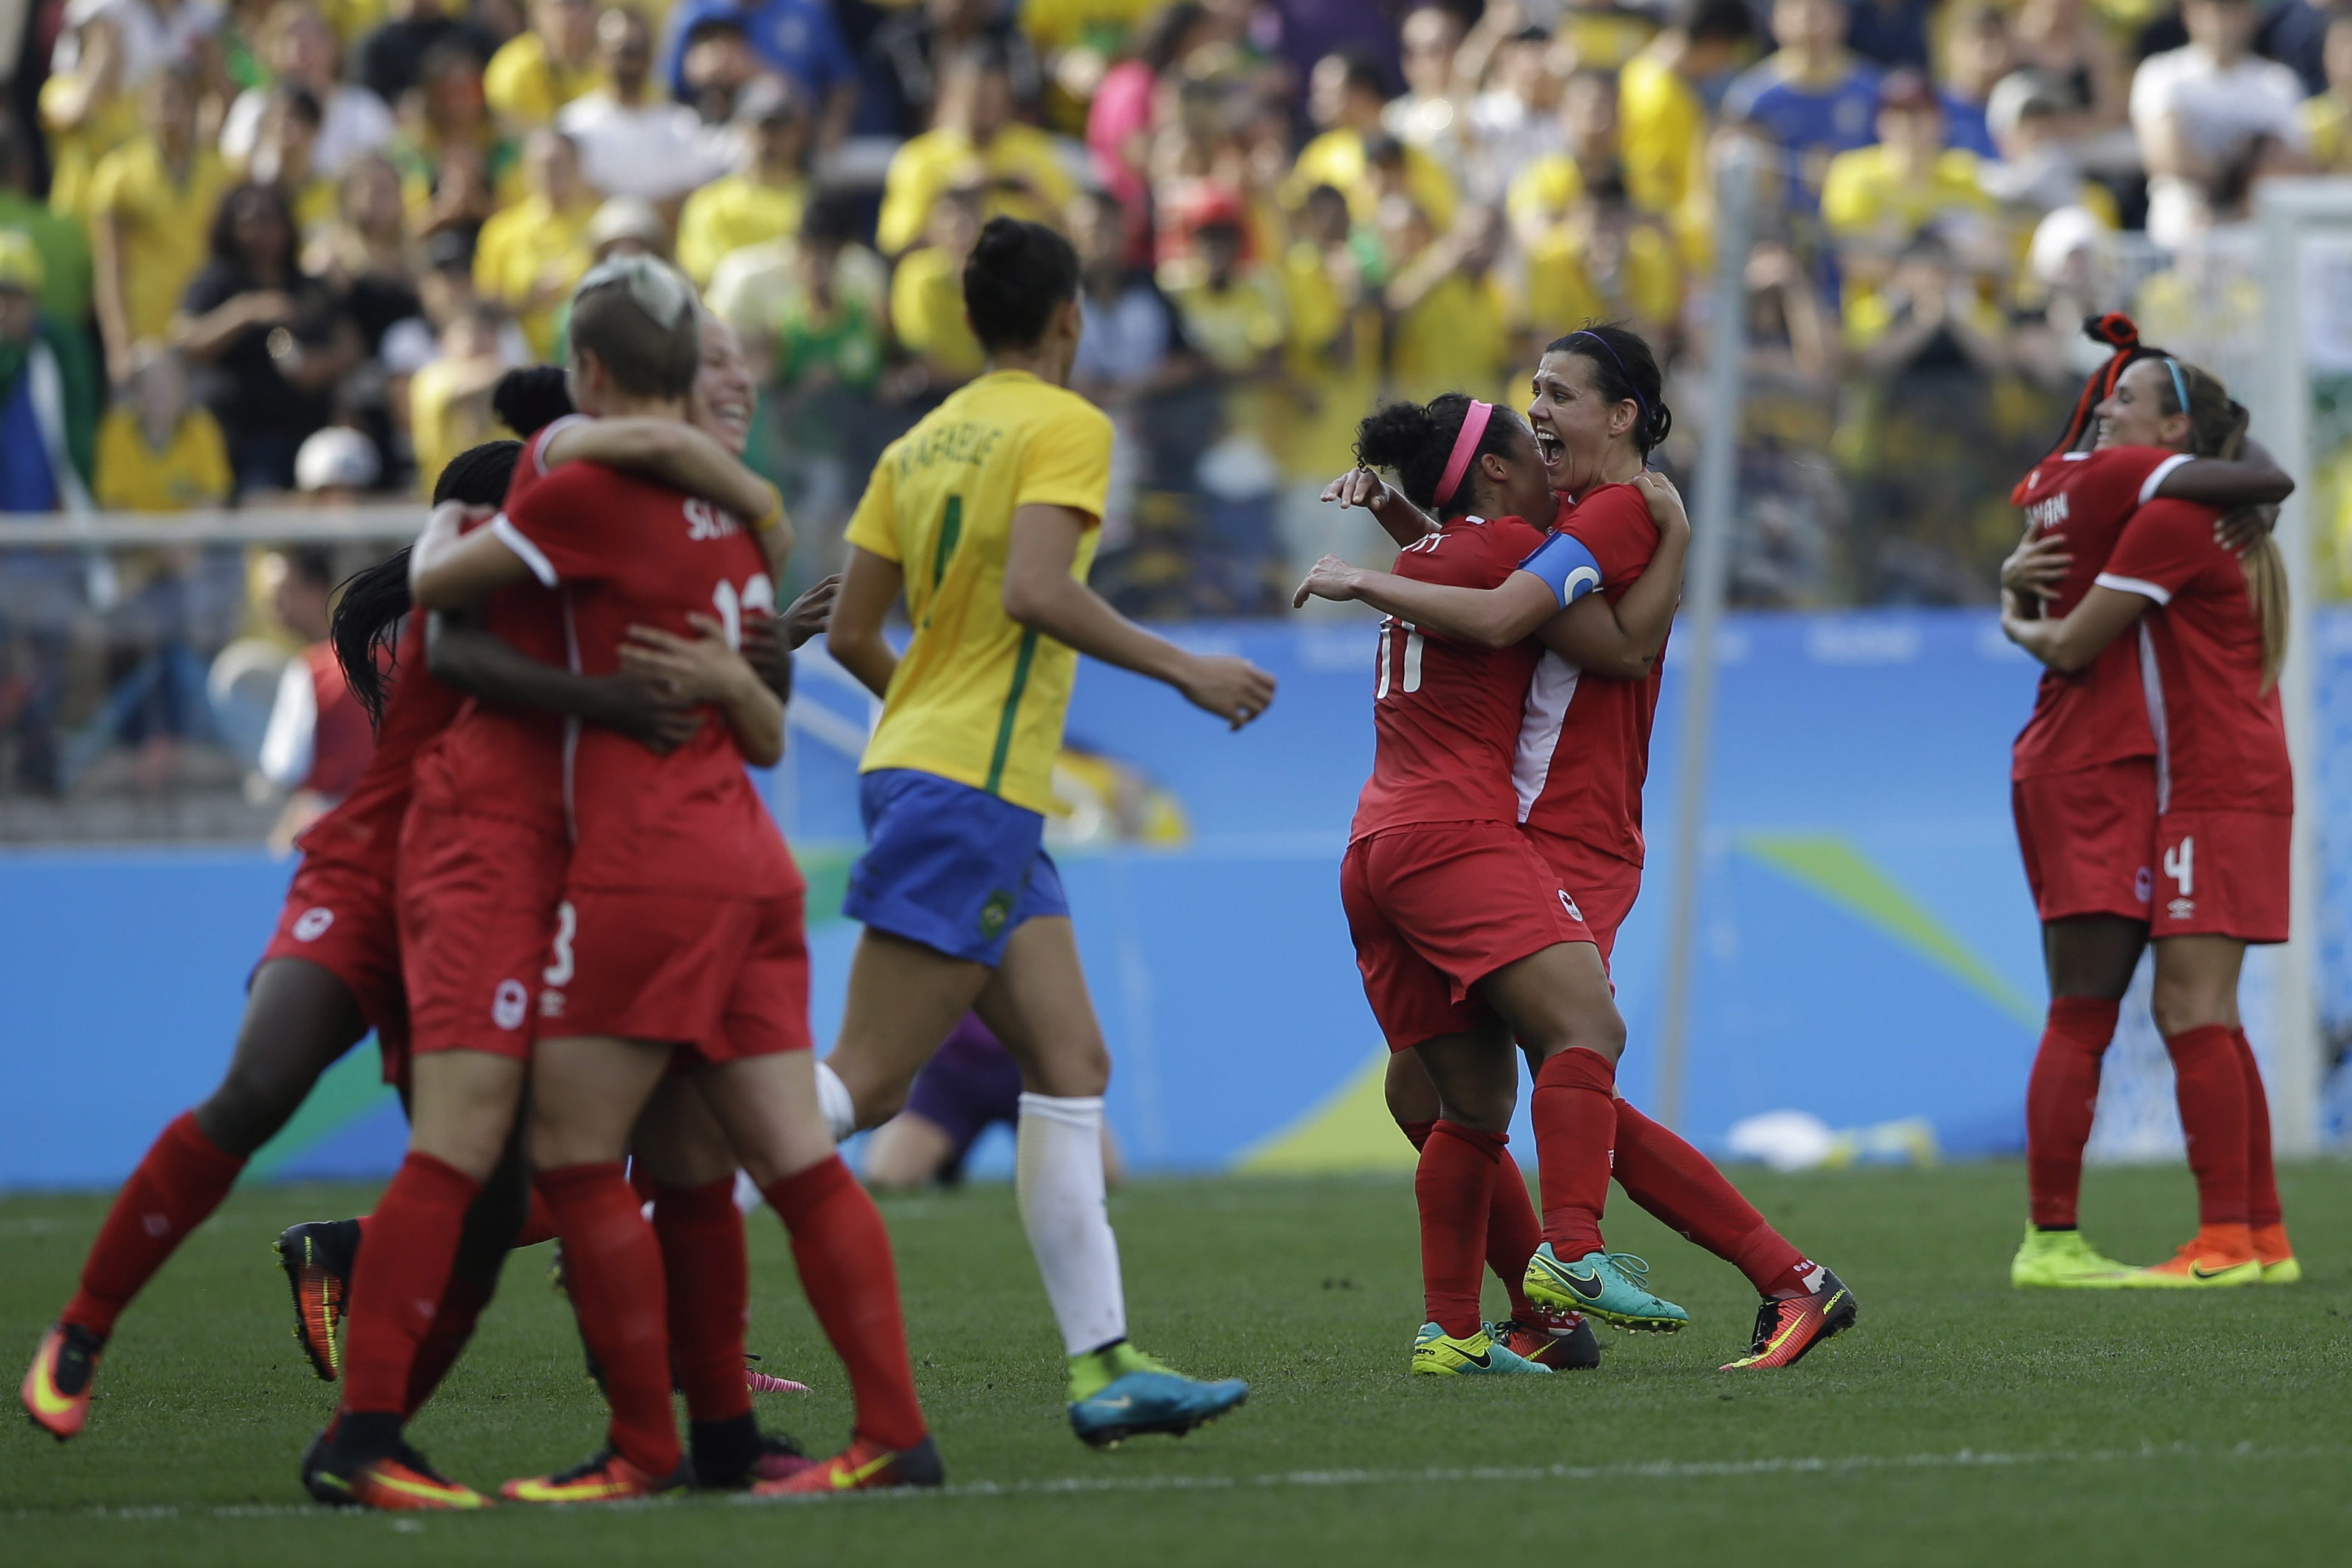 Canada players celebrate after beating Brazil 2-1 on the bronze medal match of the women's Olympic football tournament between Brazil and Canada at the Arena Corinthians stadium in Sao Paulo, Friday Aug. 19, 2016. (AP Photo/Nelson Antoine)